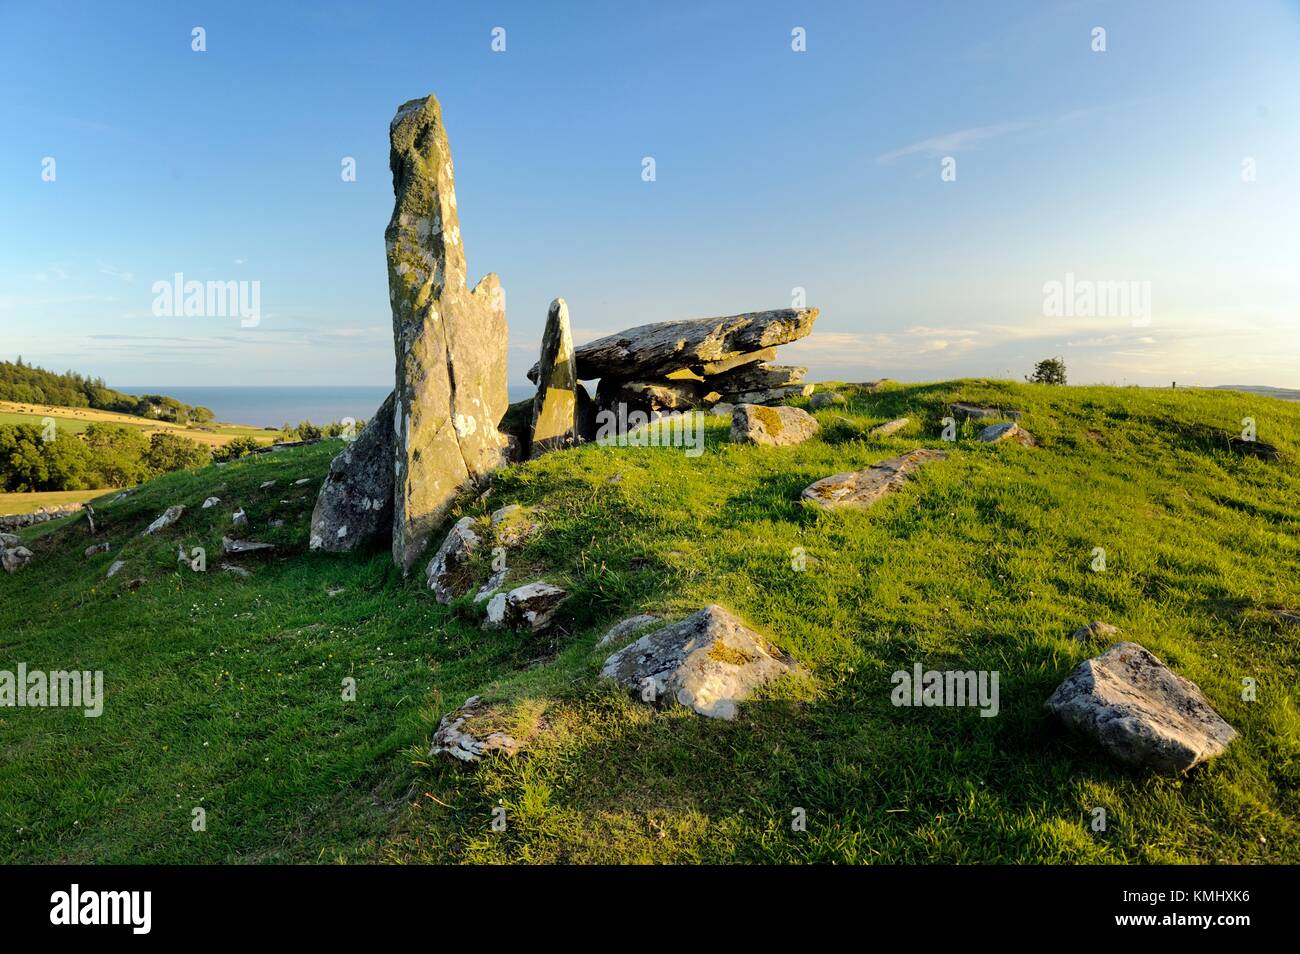 Cairn Holy 2 prehistoric burial tomb chamber used by neolithic and Bronze Age people Dumfries and Galloway region of Scotland UK Stock Photo